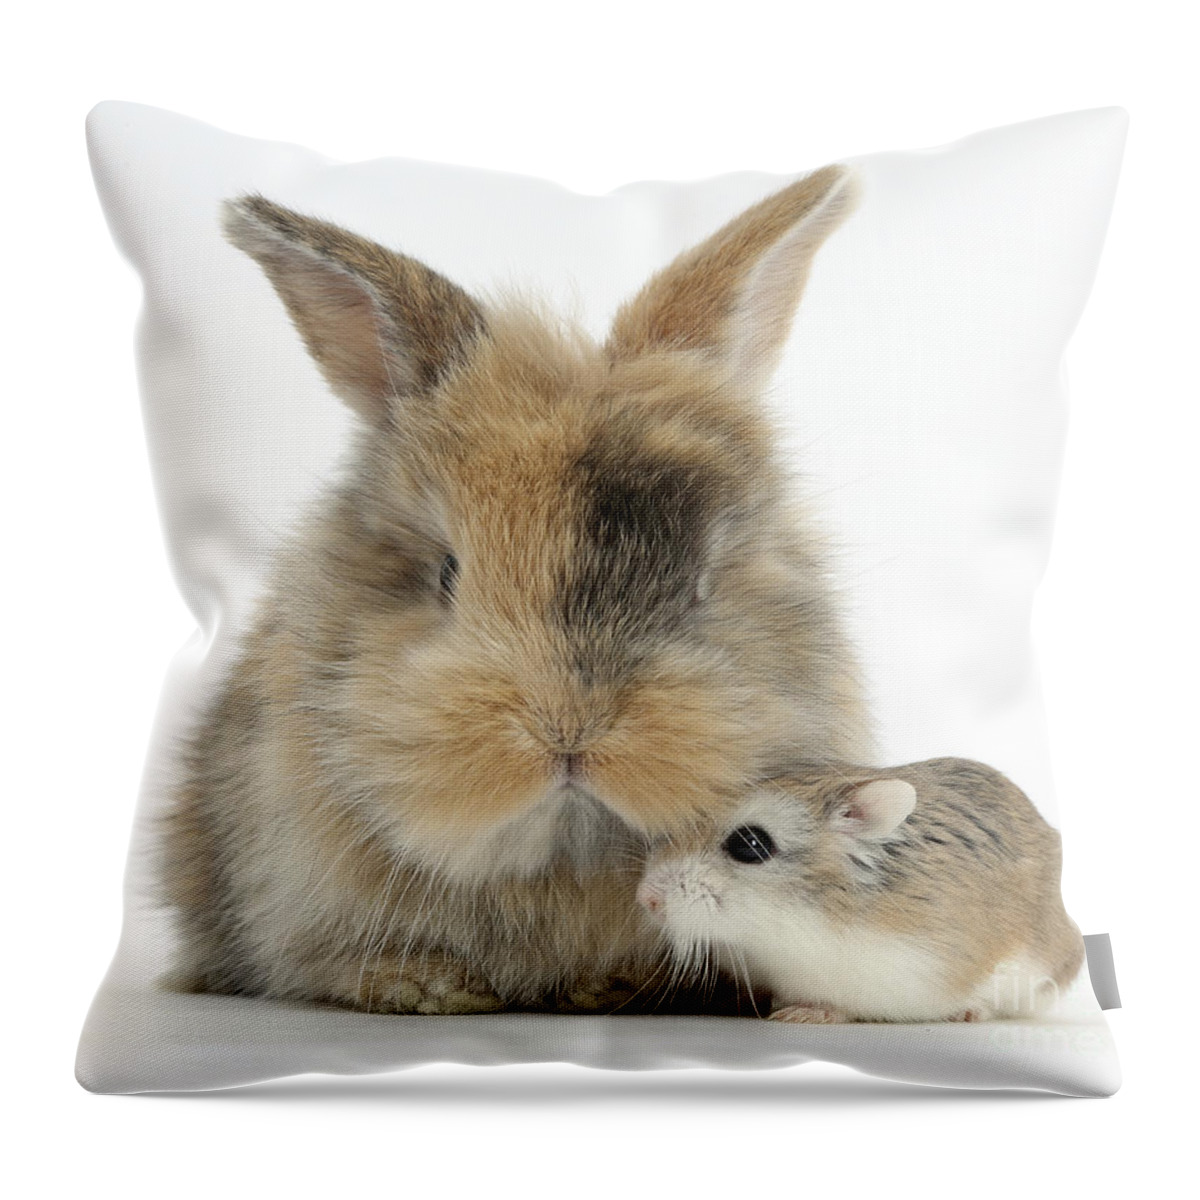 Roborovski Hamster Throw Pillow featuring the photograph Rabbit With Roborovski Hamster by Mark Taylor